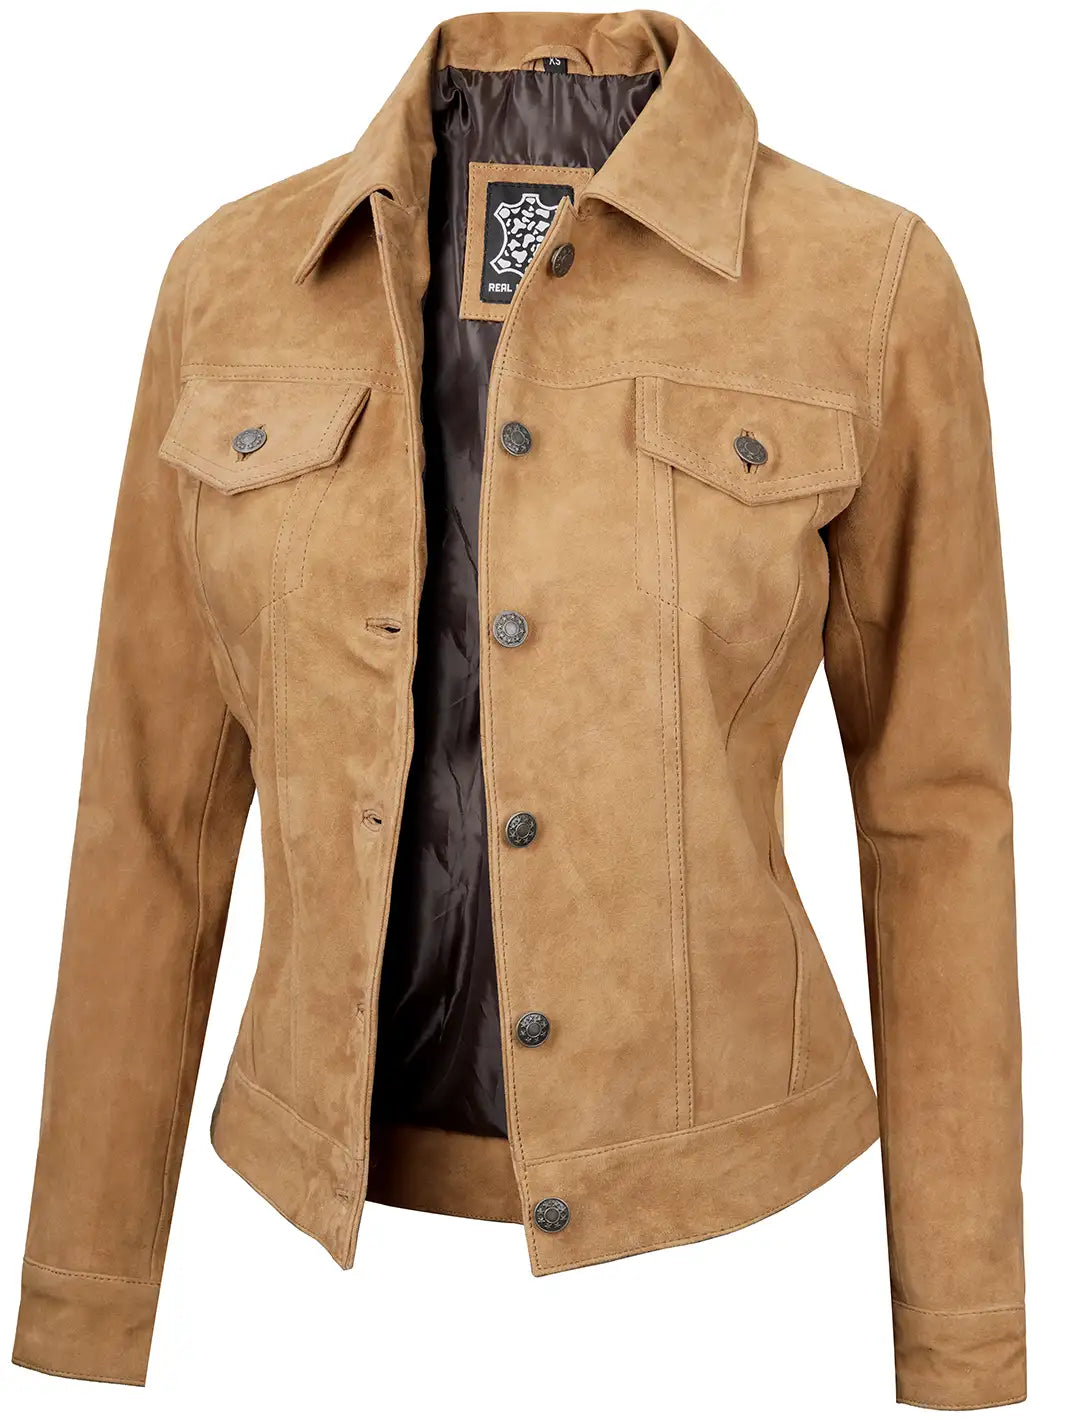 Women light brown suede leather jacket